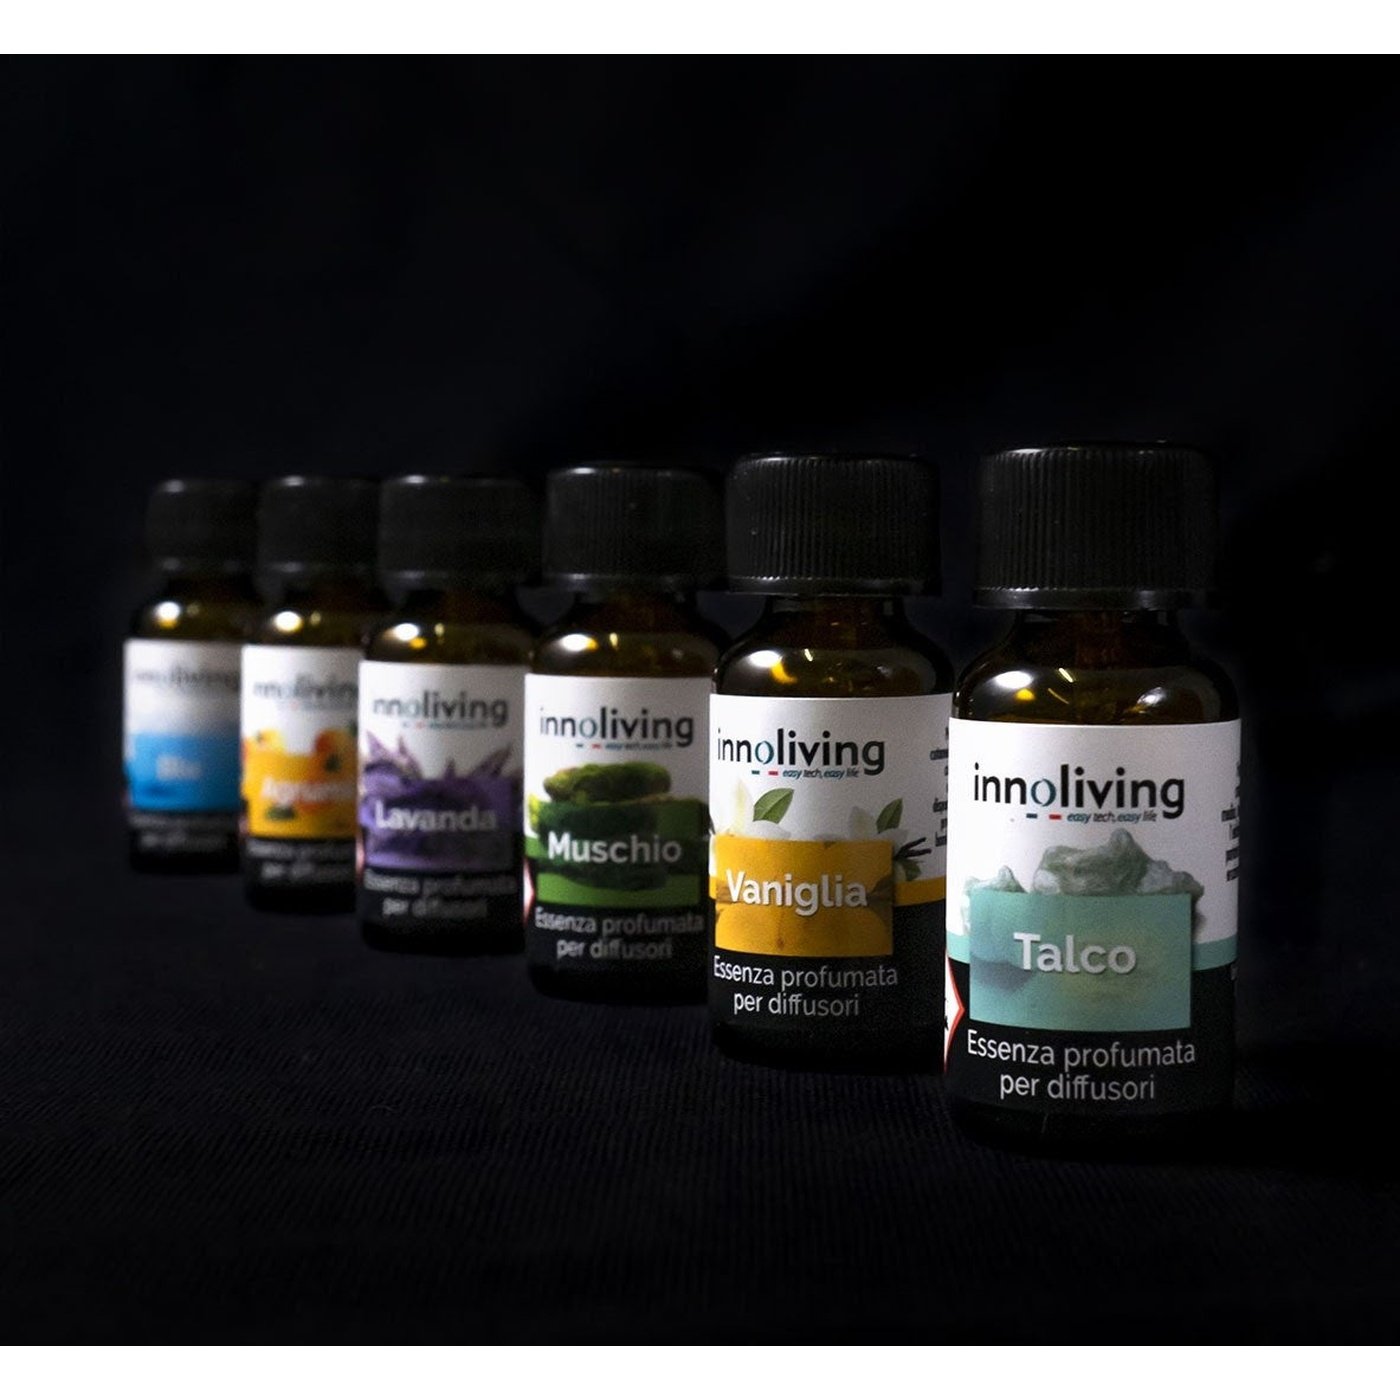 Set of 6 scented essences for relaxing aroma diffusers, Innoliving INN-774